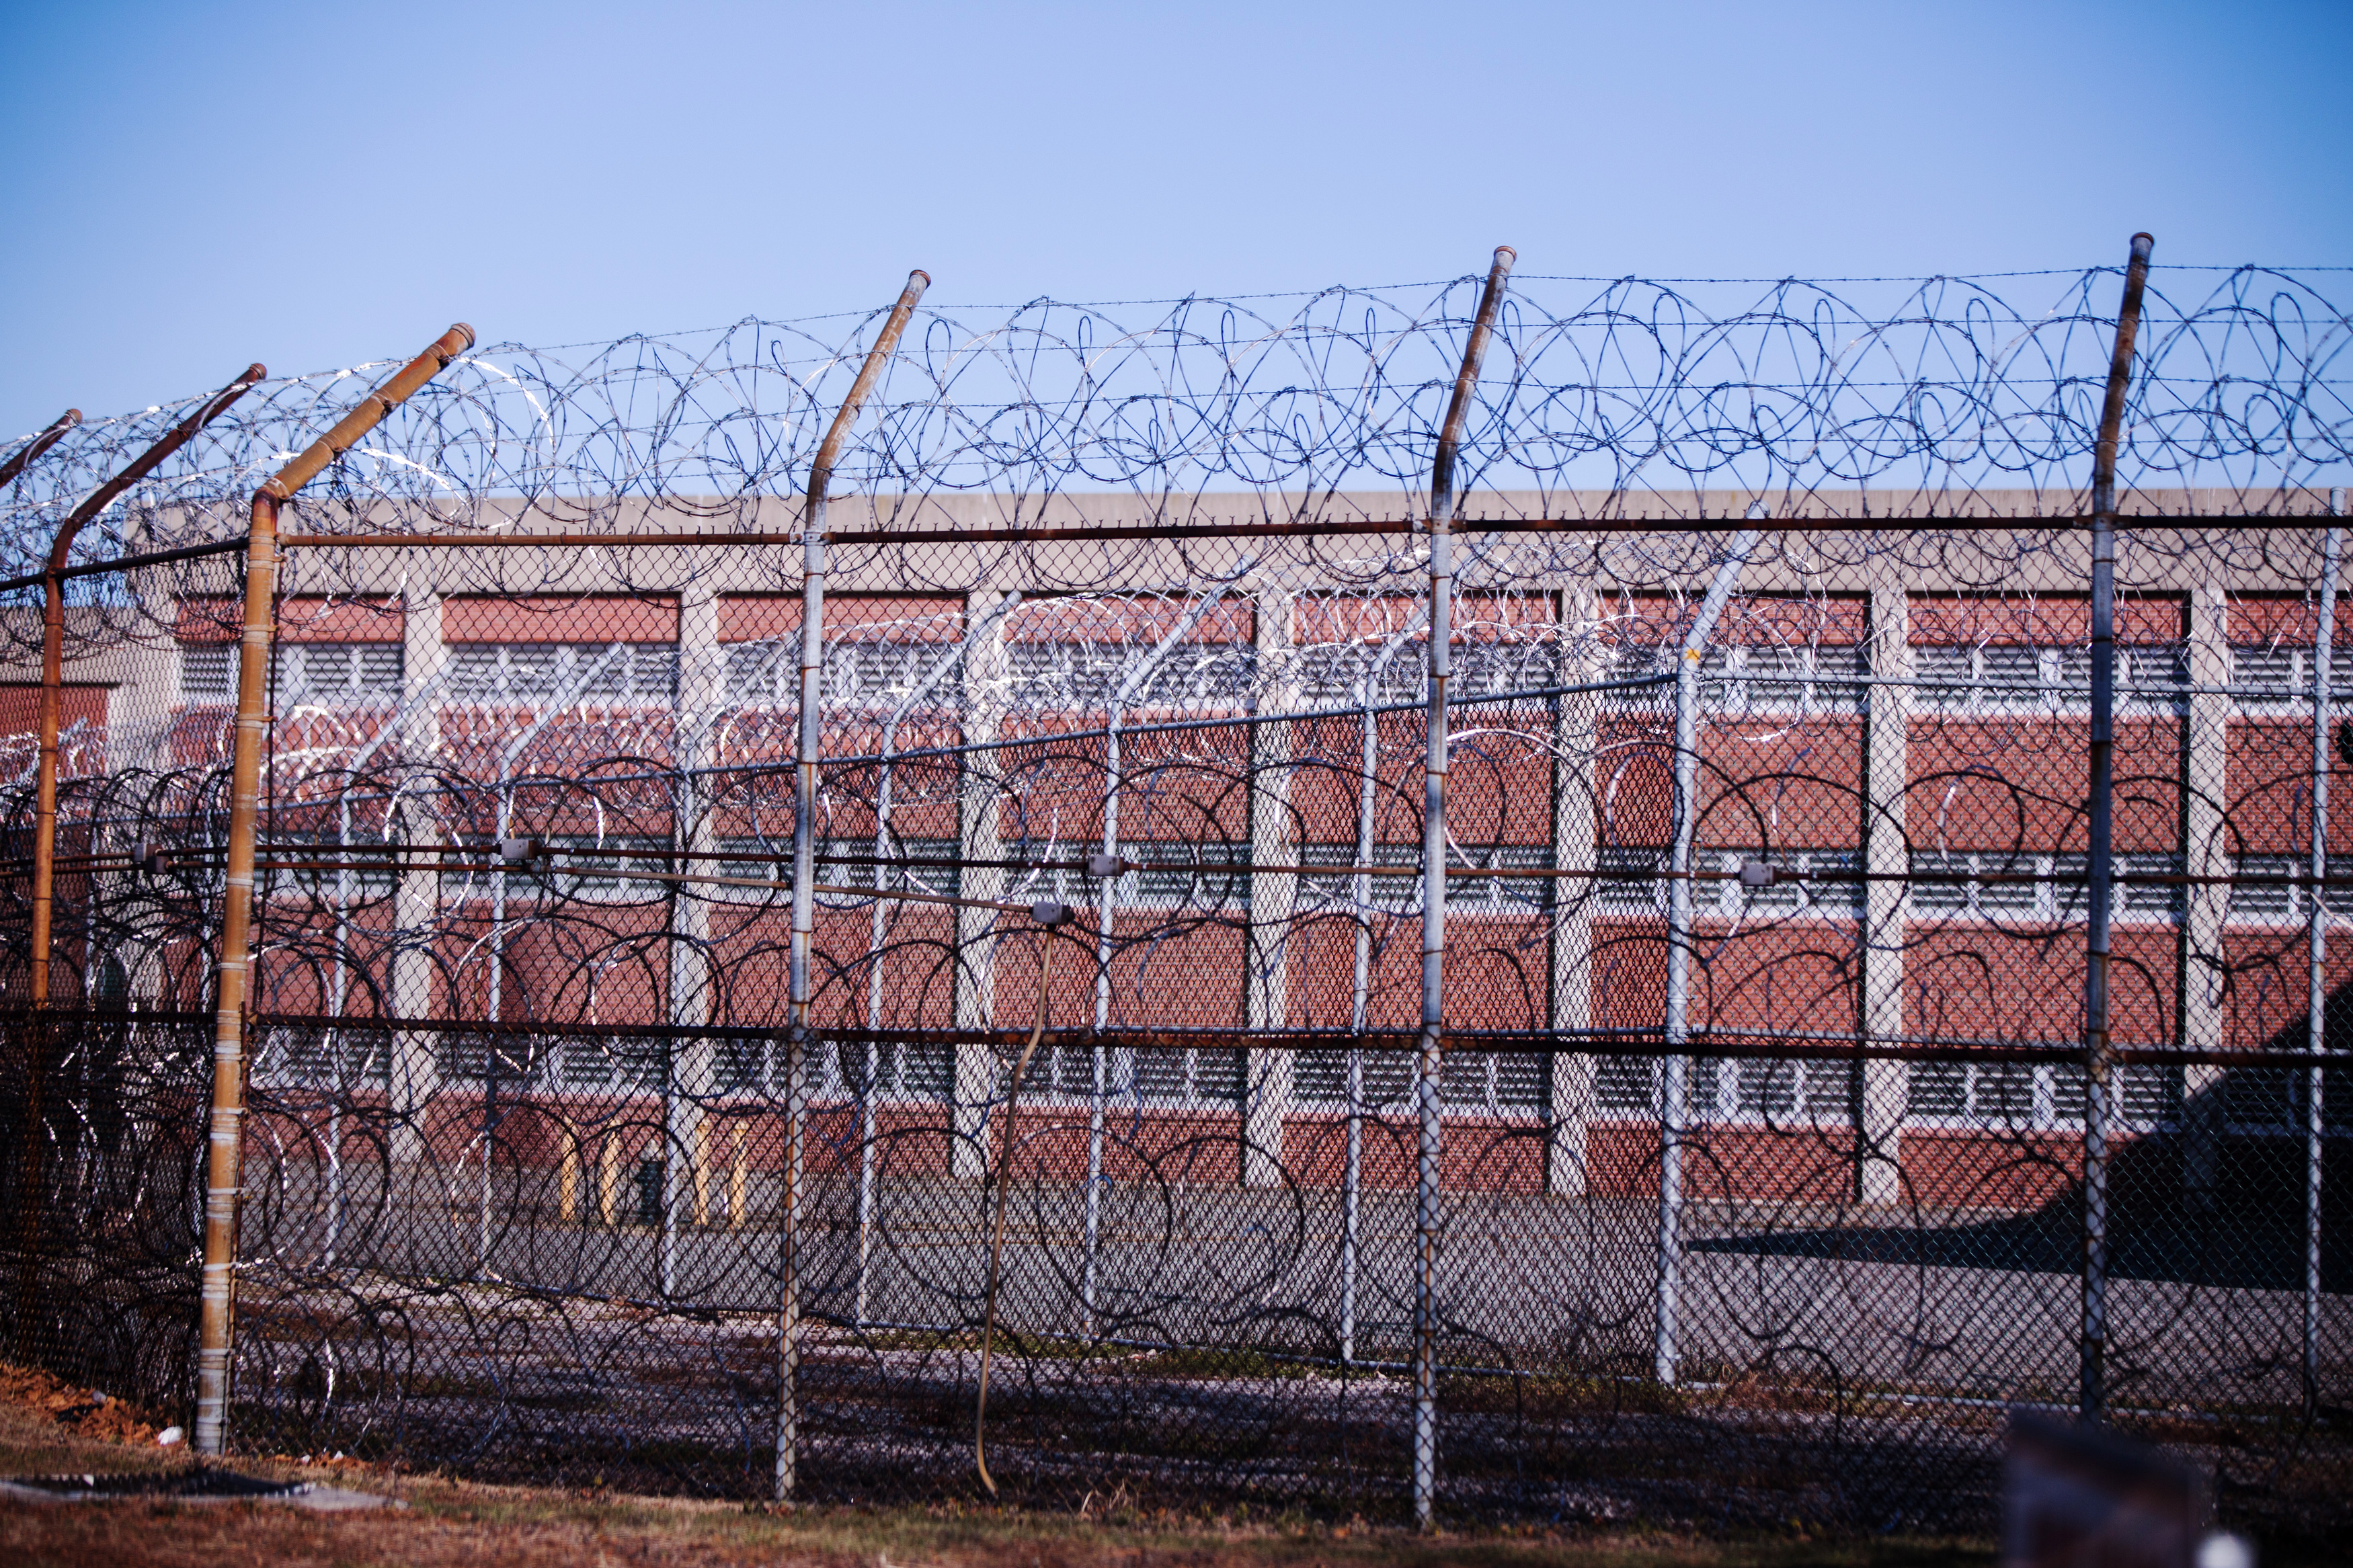 Barbed wire fences surround a building on Rikers Island Correctional Facility in New York on Dec. 24, 2013. (Lucas Jackson—Reuters)